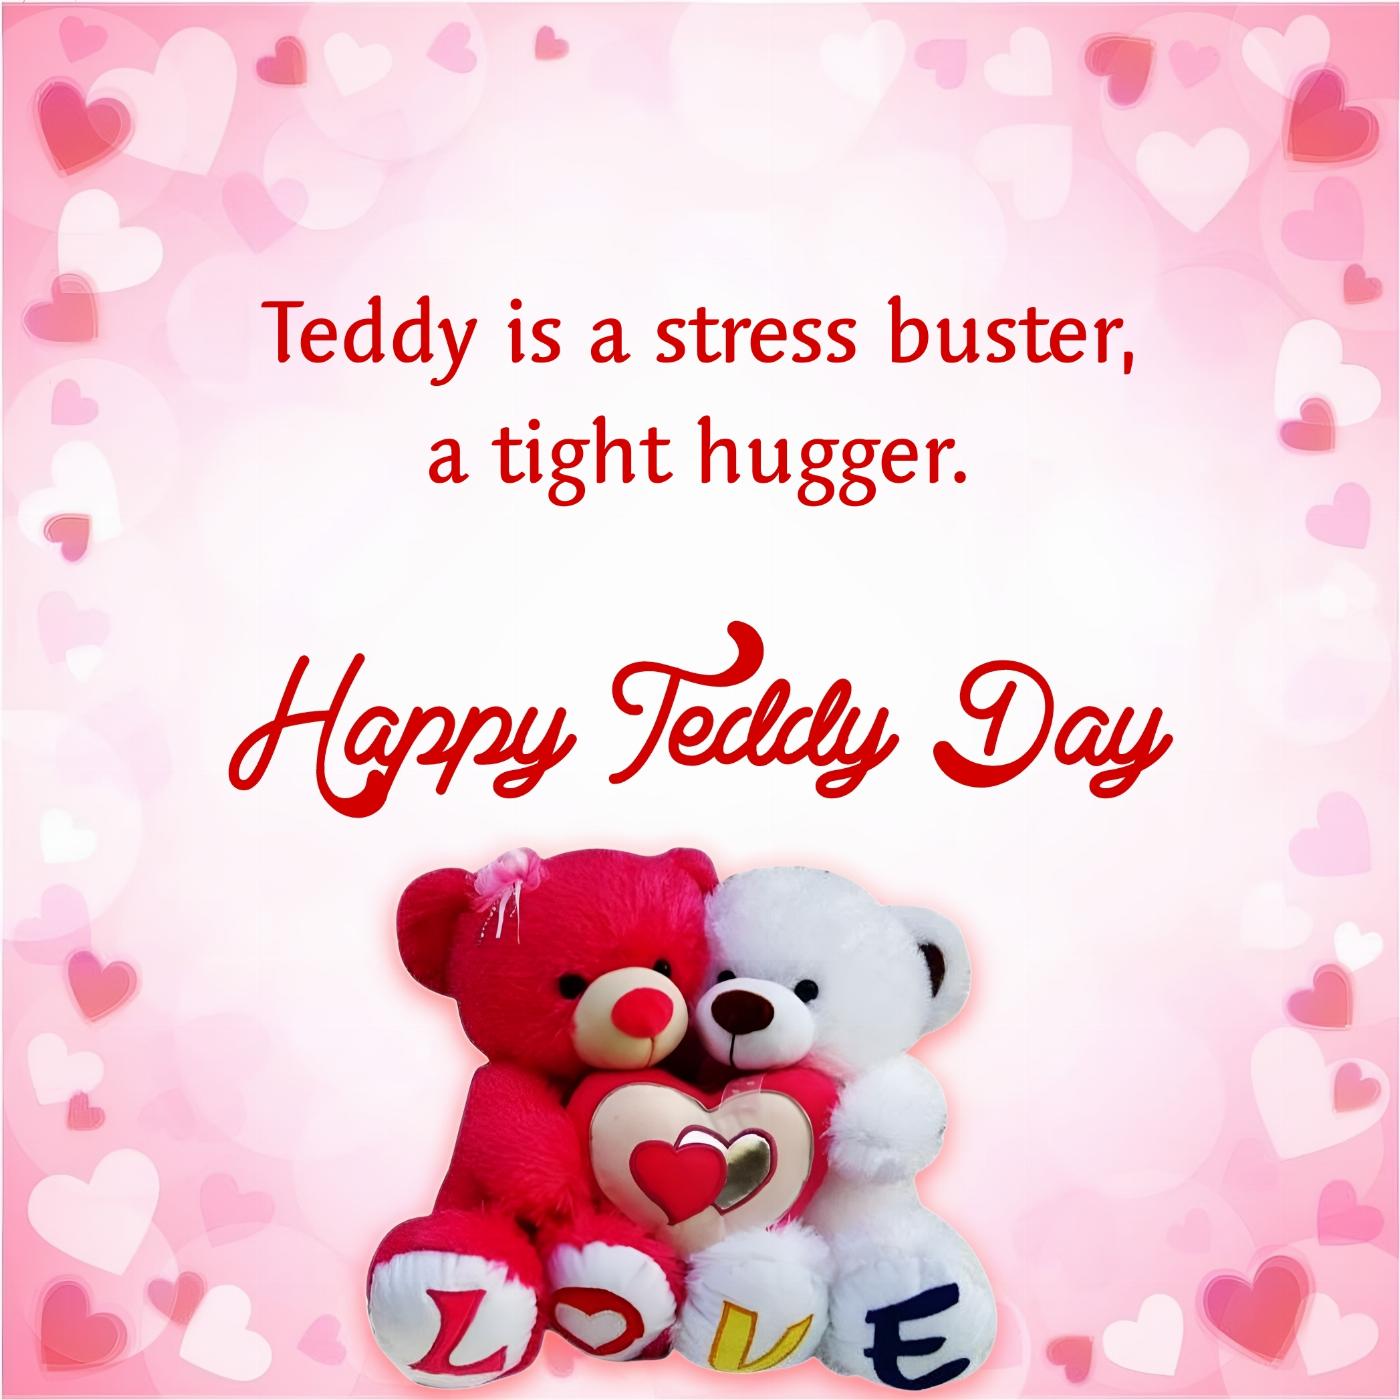 Teddy is a stress buster a tight hugger